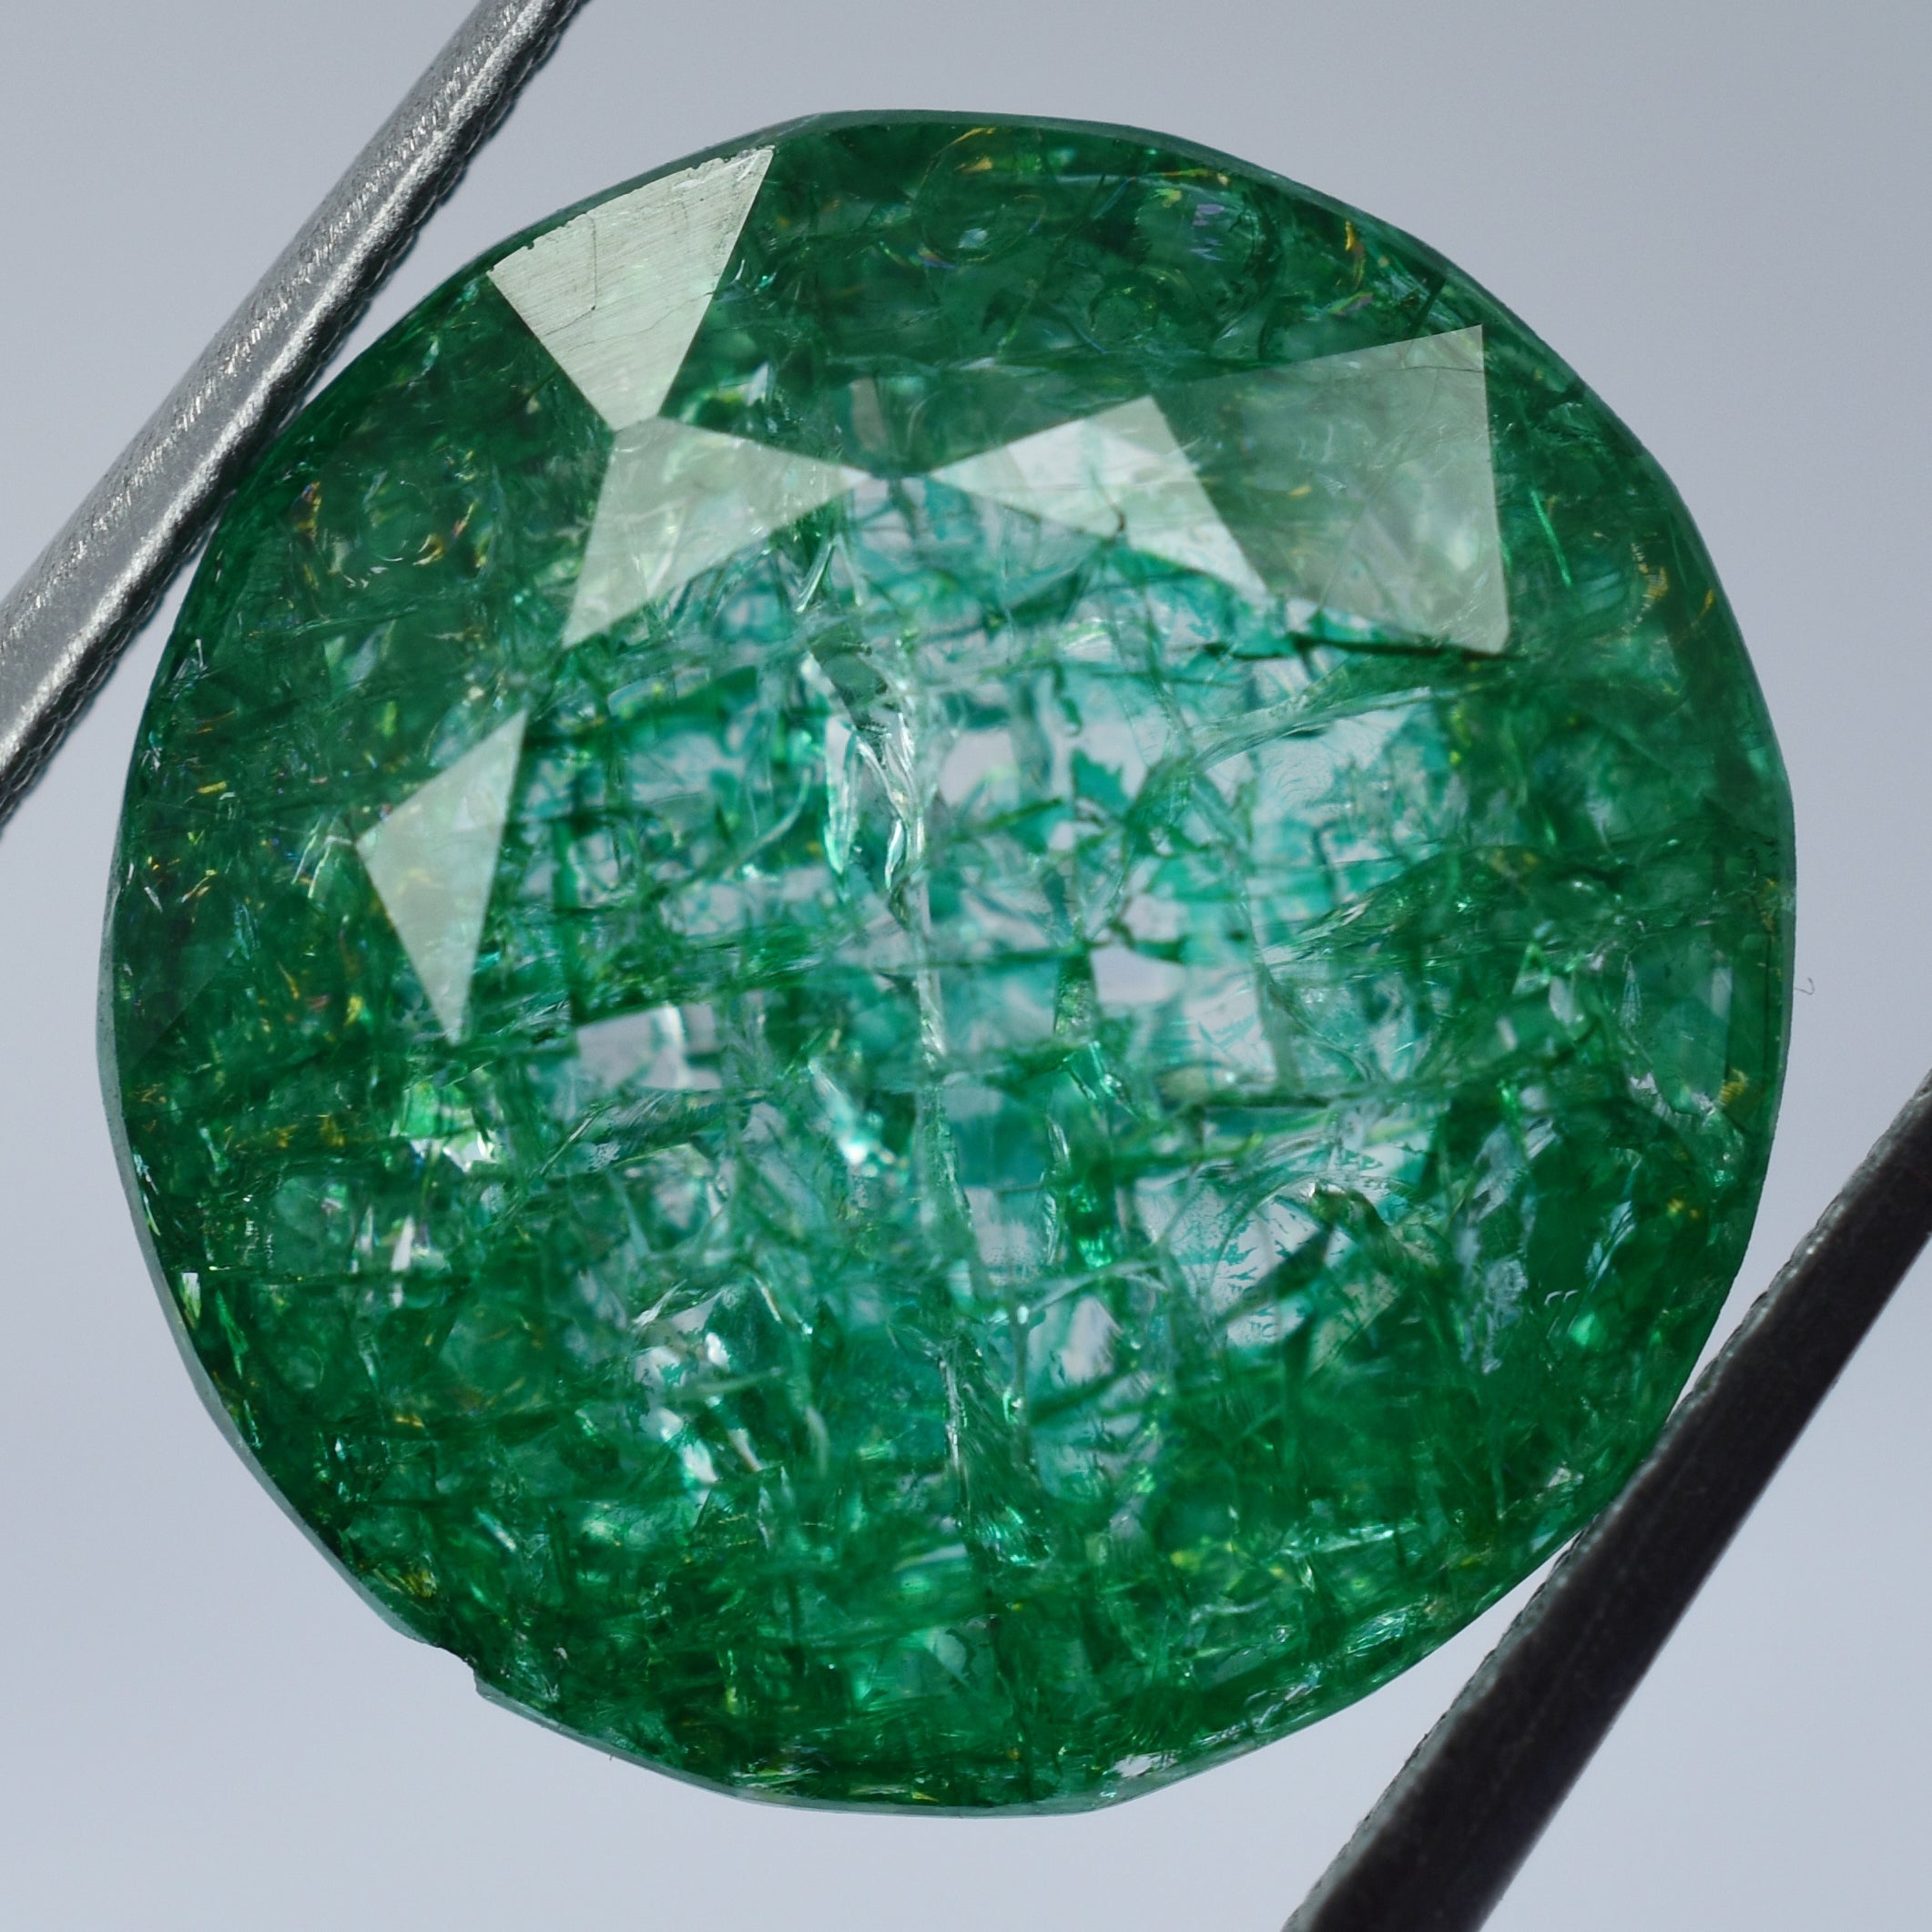 Limited Offer ! Natural Green Emerald Certified 9.52 Carat Round Shape Emerald Loose Gemstone Ring Size Emerald Gemstone-Free Delivery-Free Gift